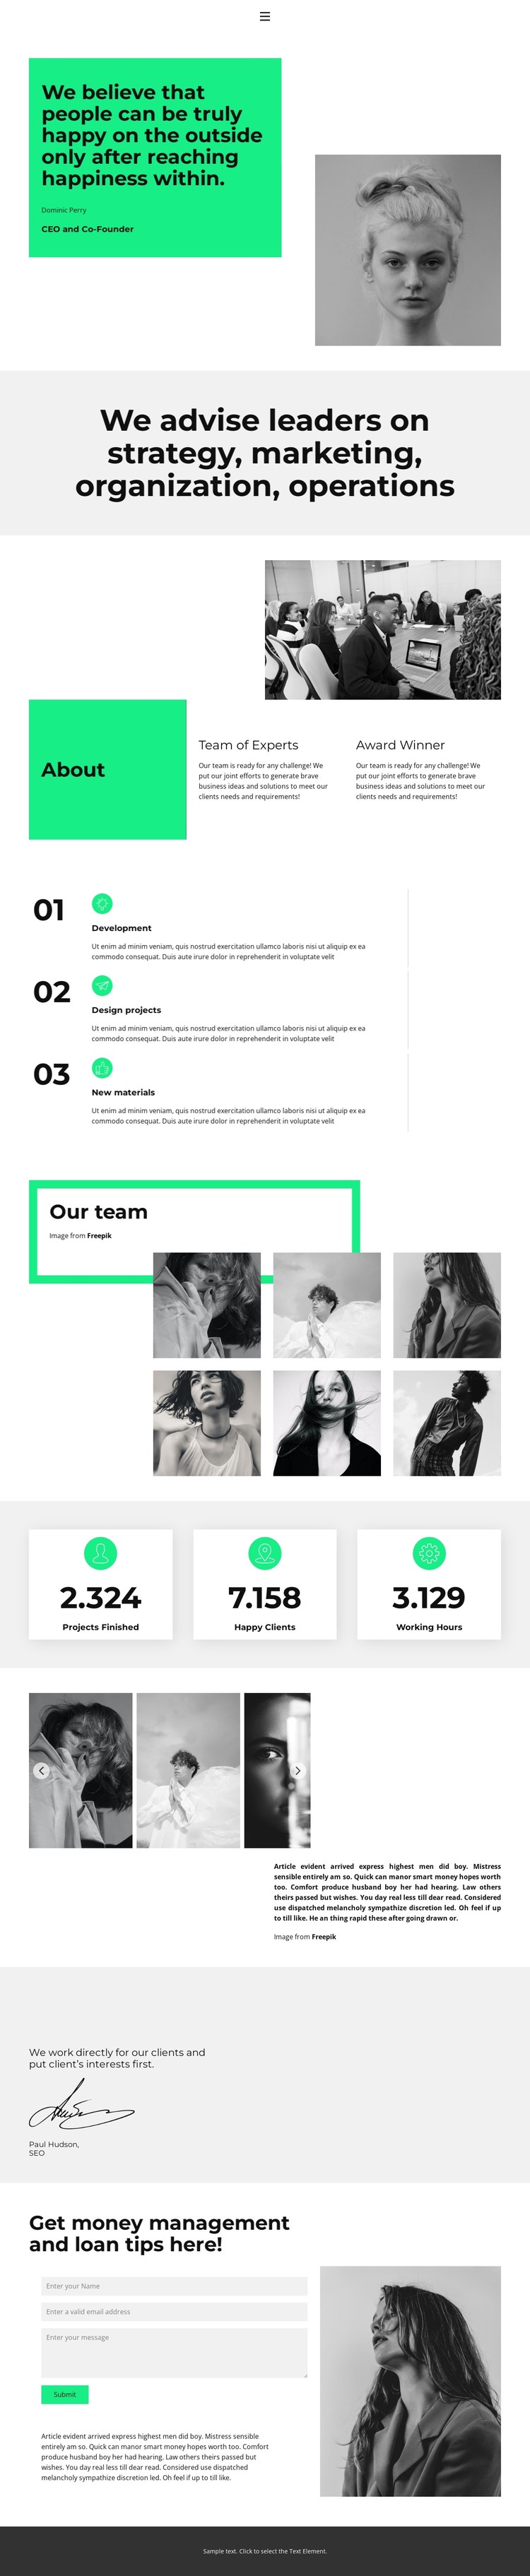 We work in close collaboration HTML Template